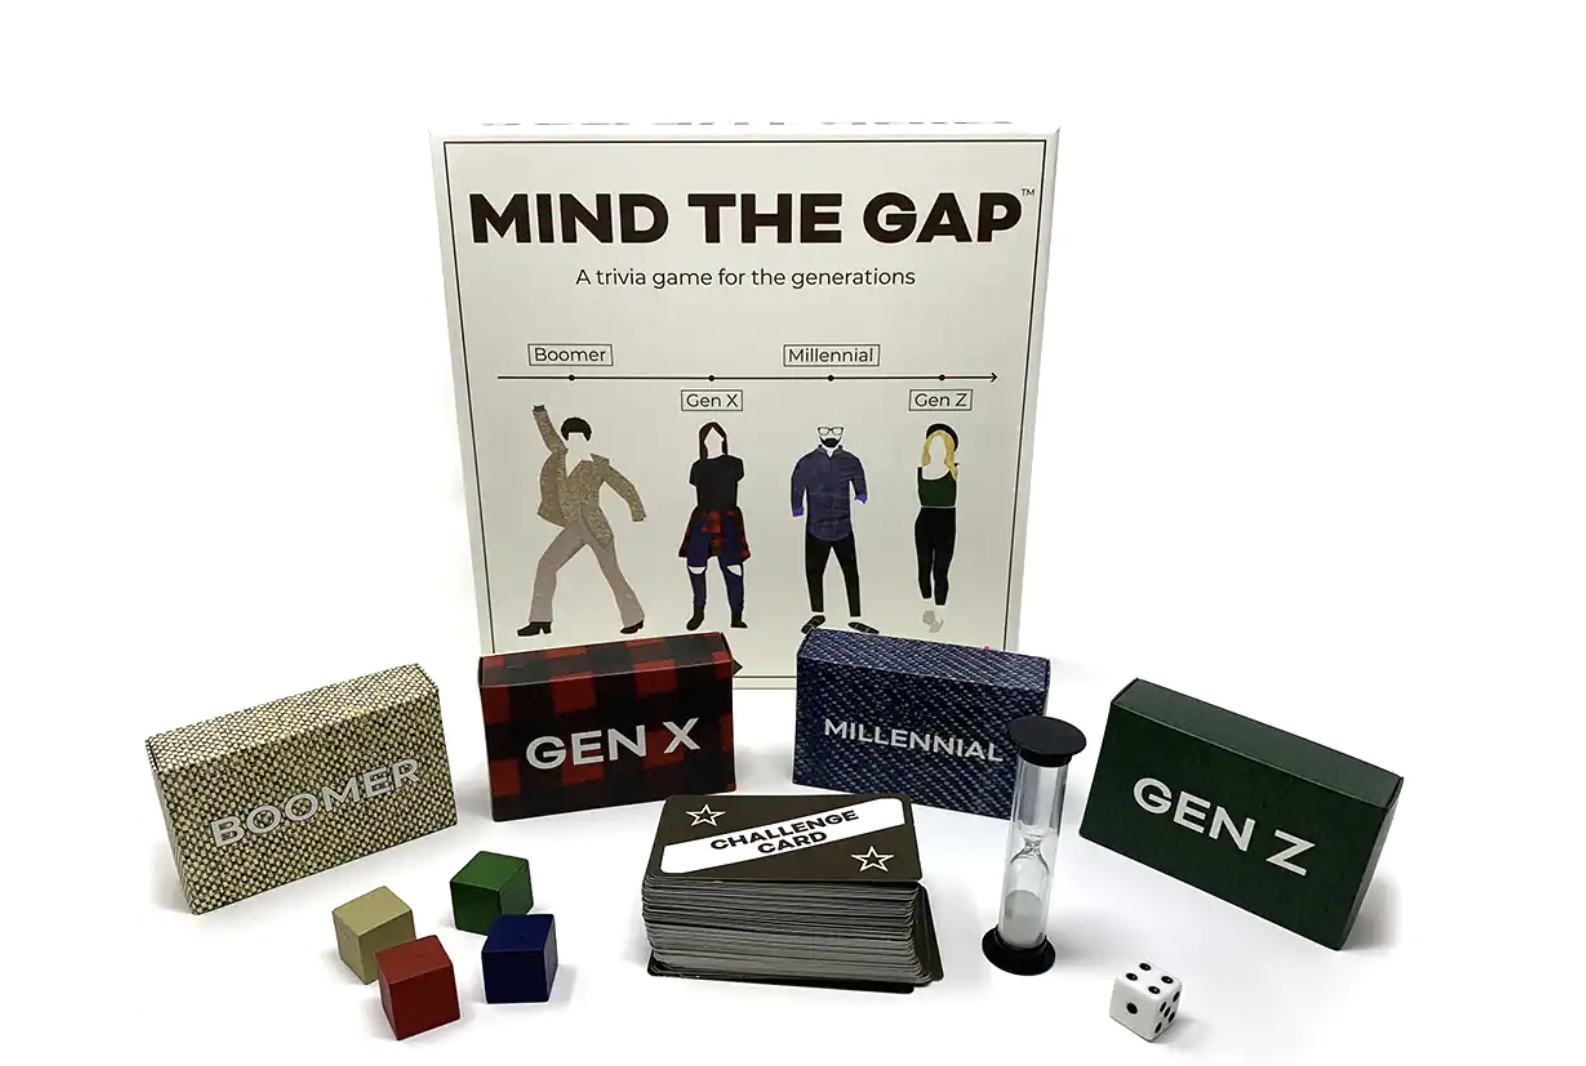 the box and the cards in front of a plain background